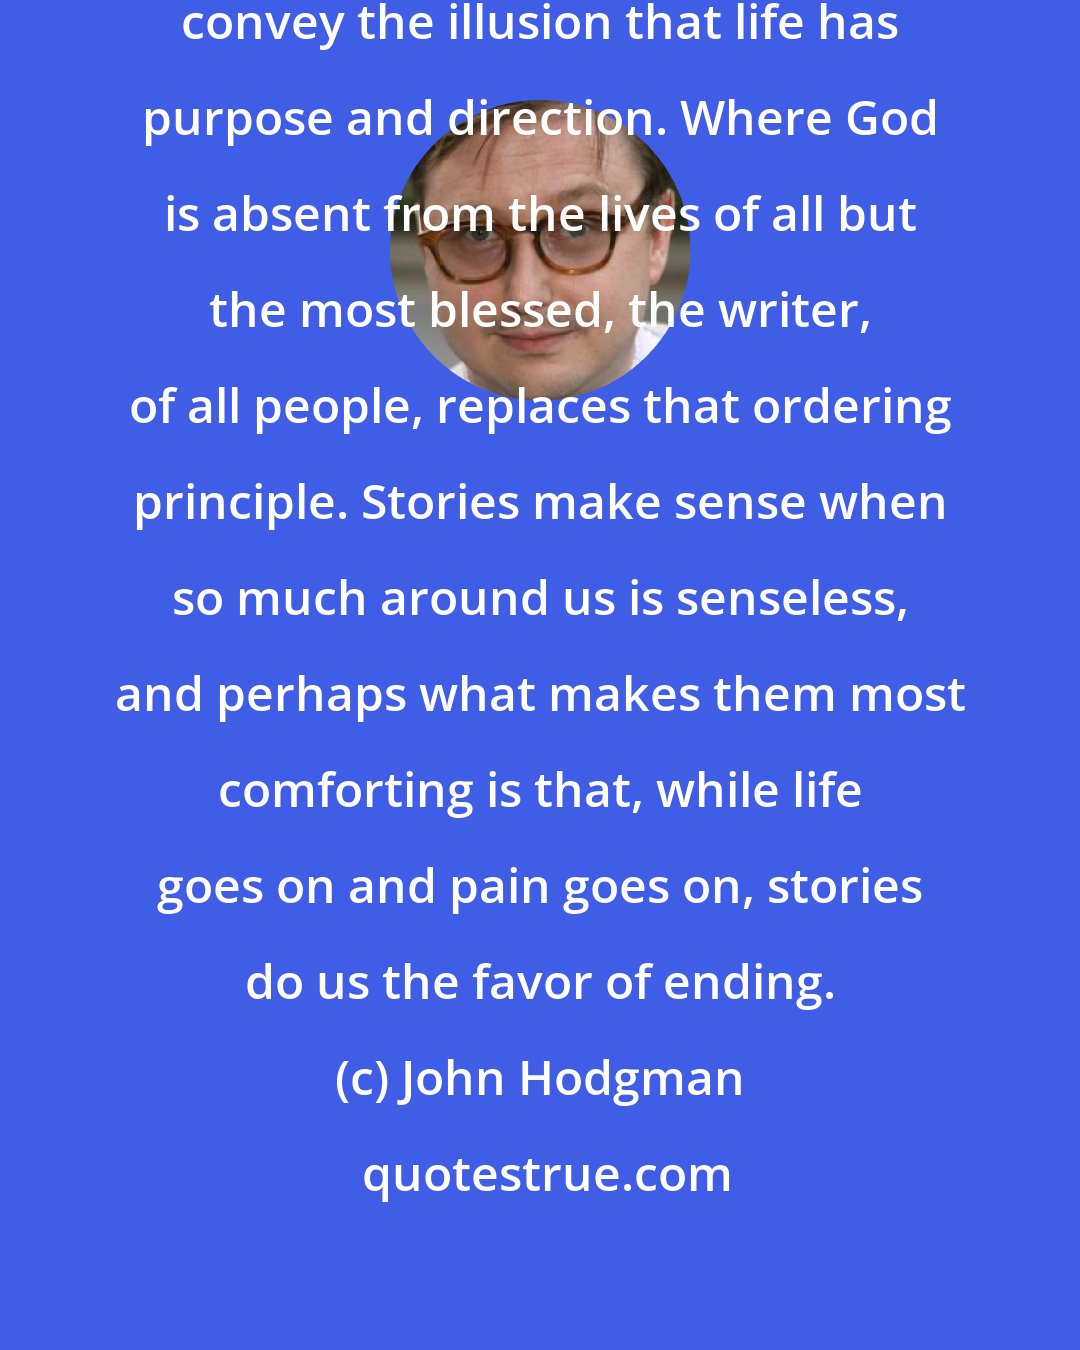 John Hodgman: Stories hold power because they convey the illusion that life has purpose and direction. Where God is absent from the lives of all but the most blessed, the writer, of all people, replaces that ordering principle. Stories make sense when so much around us is senseless, and perhaps what makes them most comforting is that, while life goes on and pain goes on, stories do us the favor of ending.